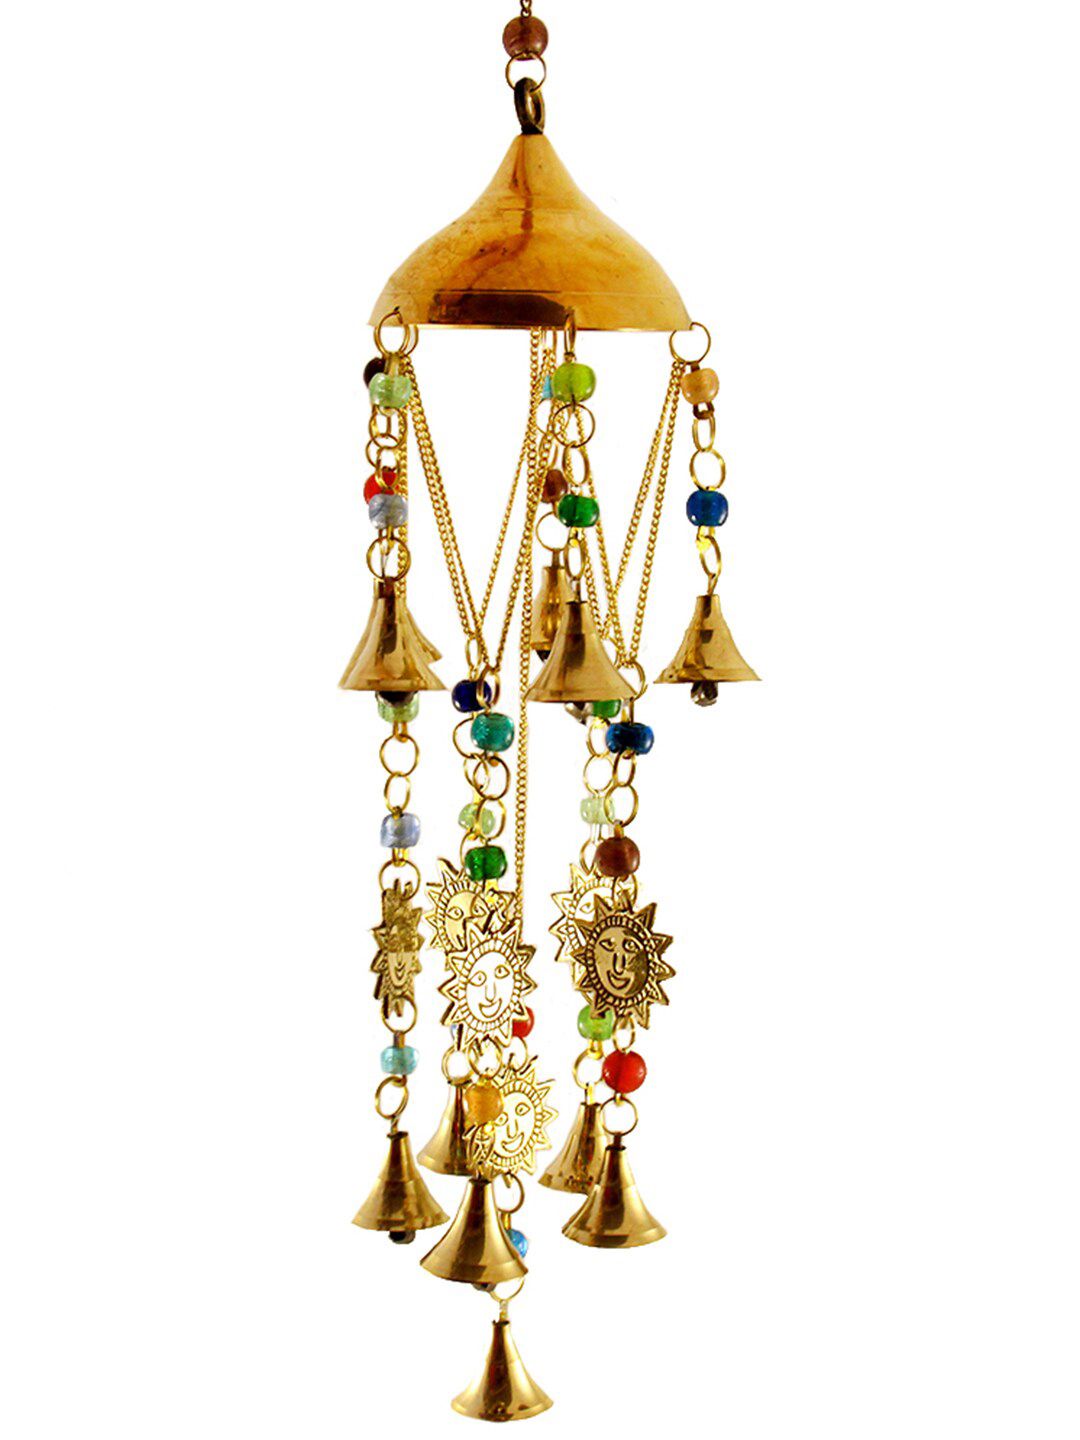 WENS Multicoloured Feng Shui Musical Sun Wind Chime Price in India